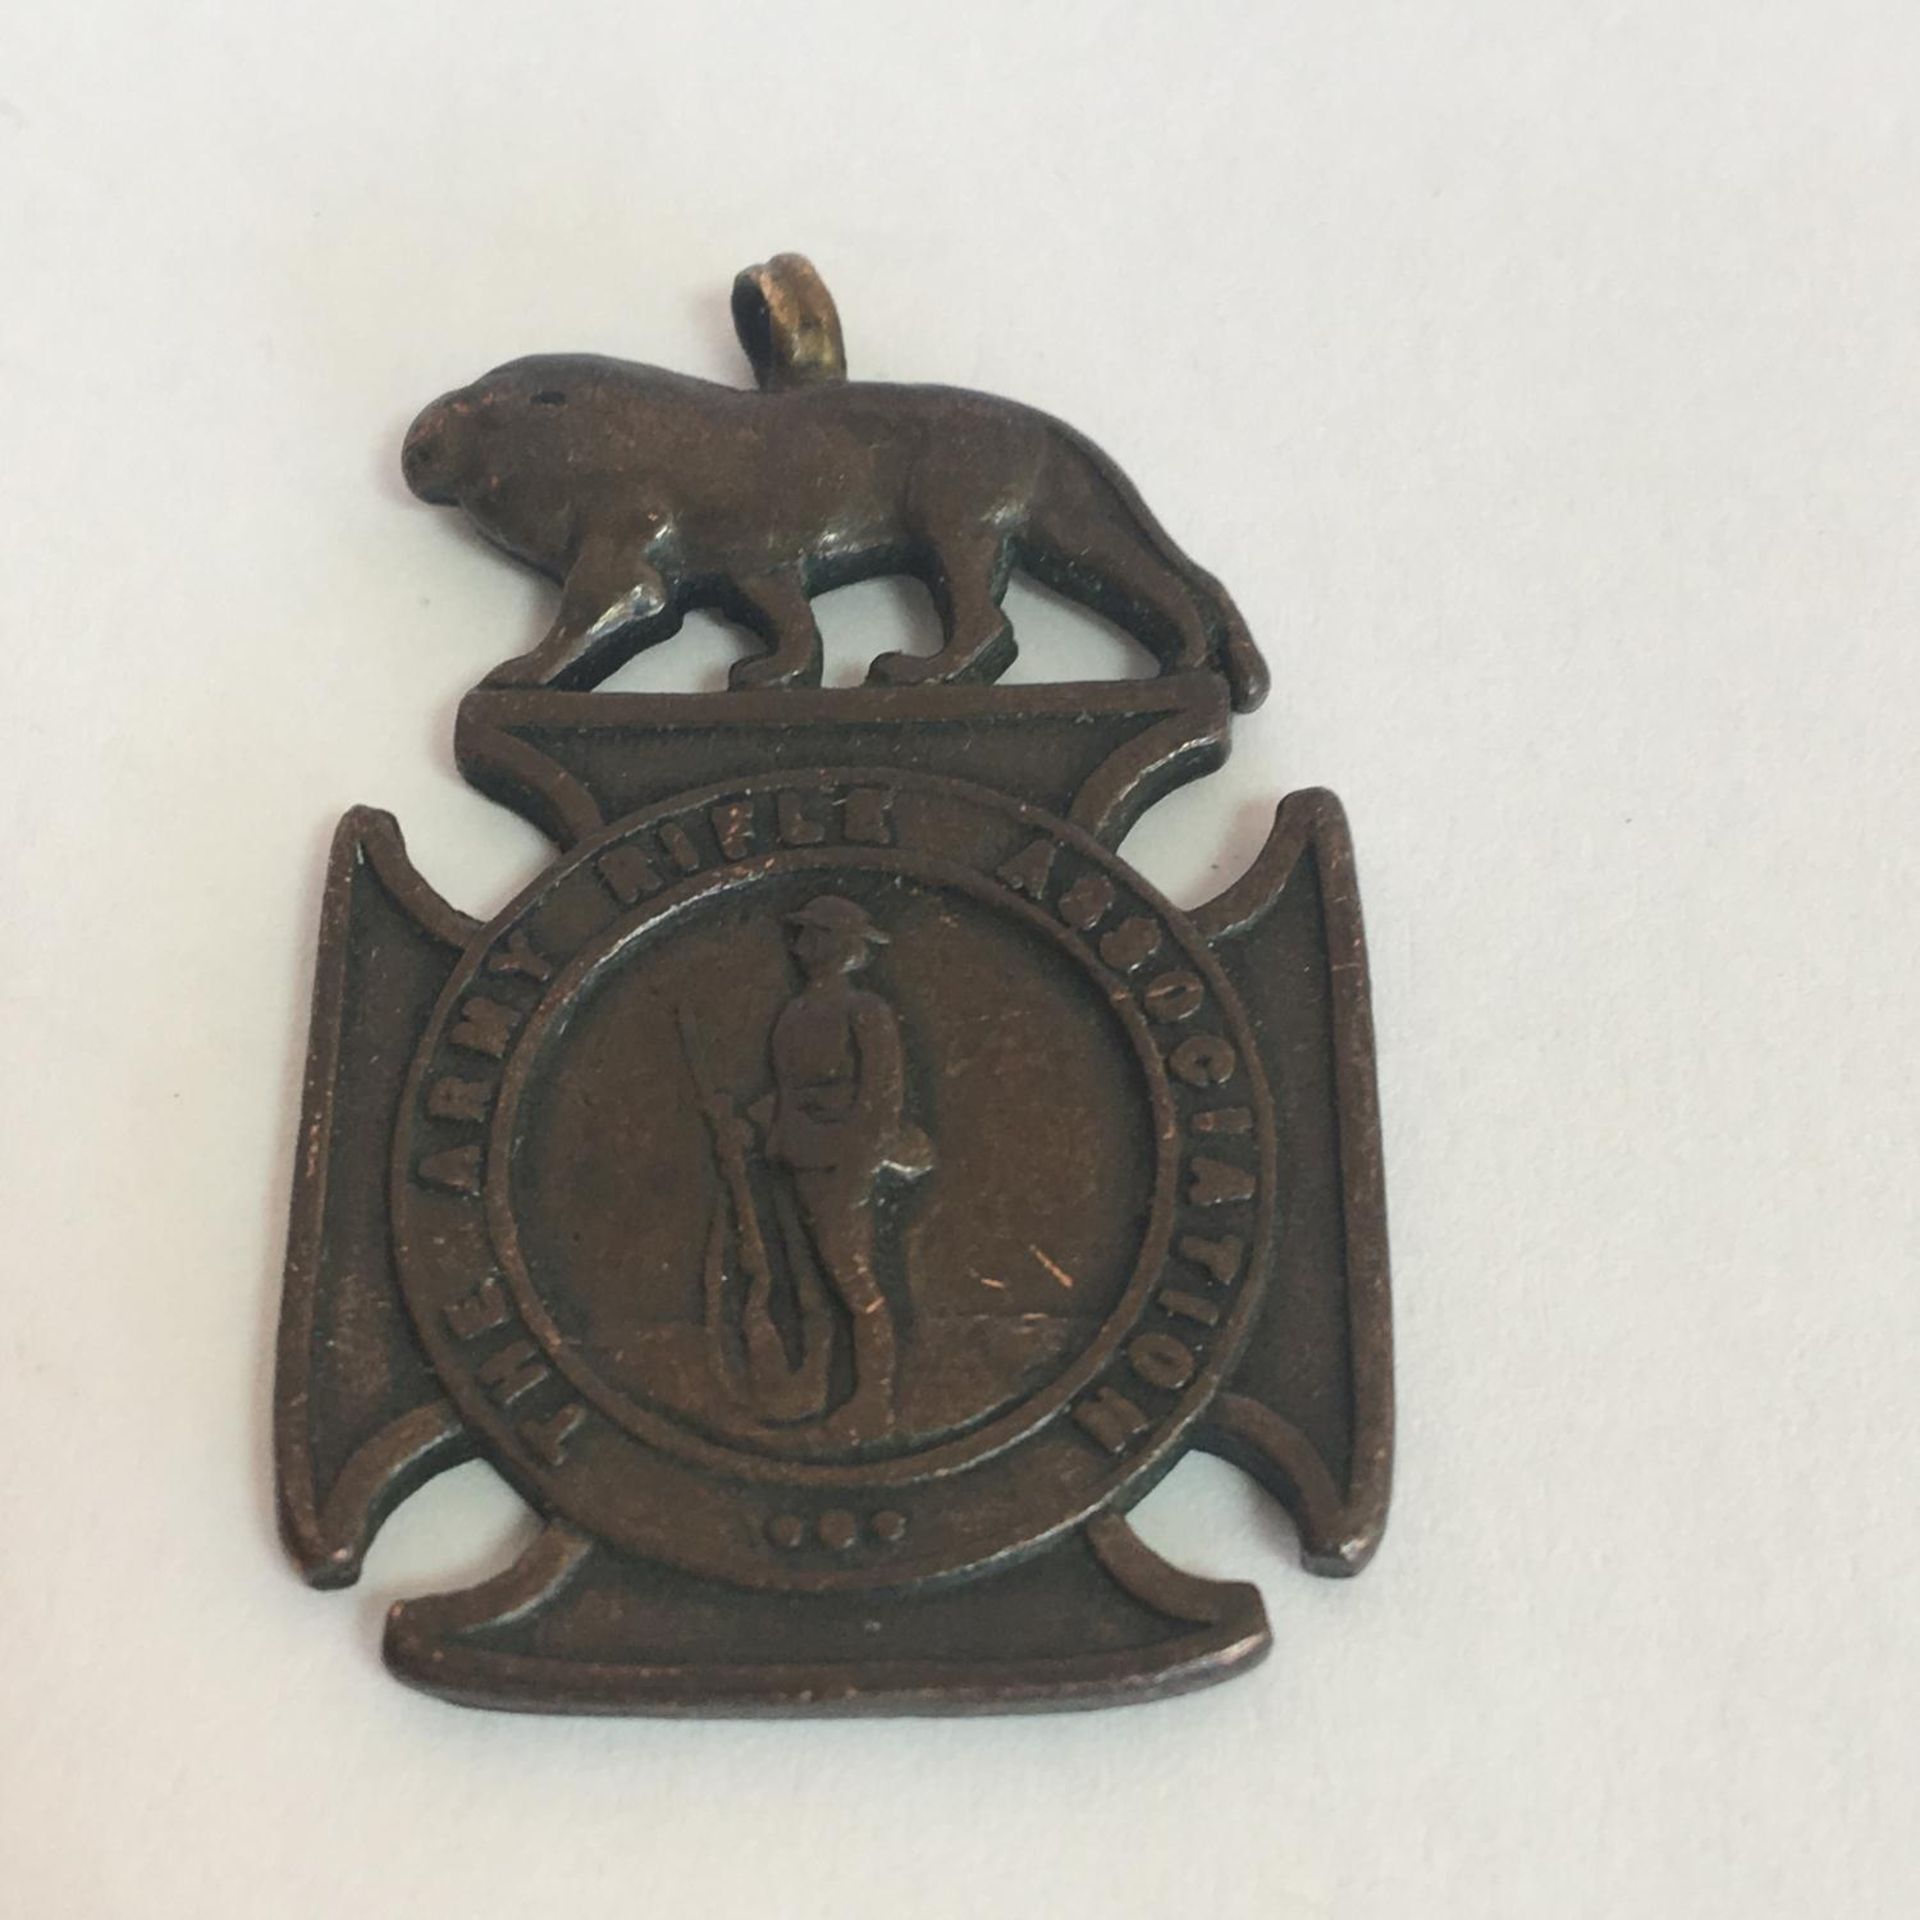 Vintage medal - The Army Rifle Association